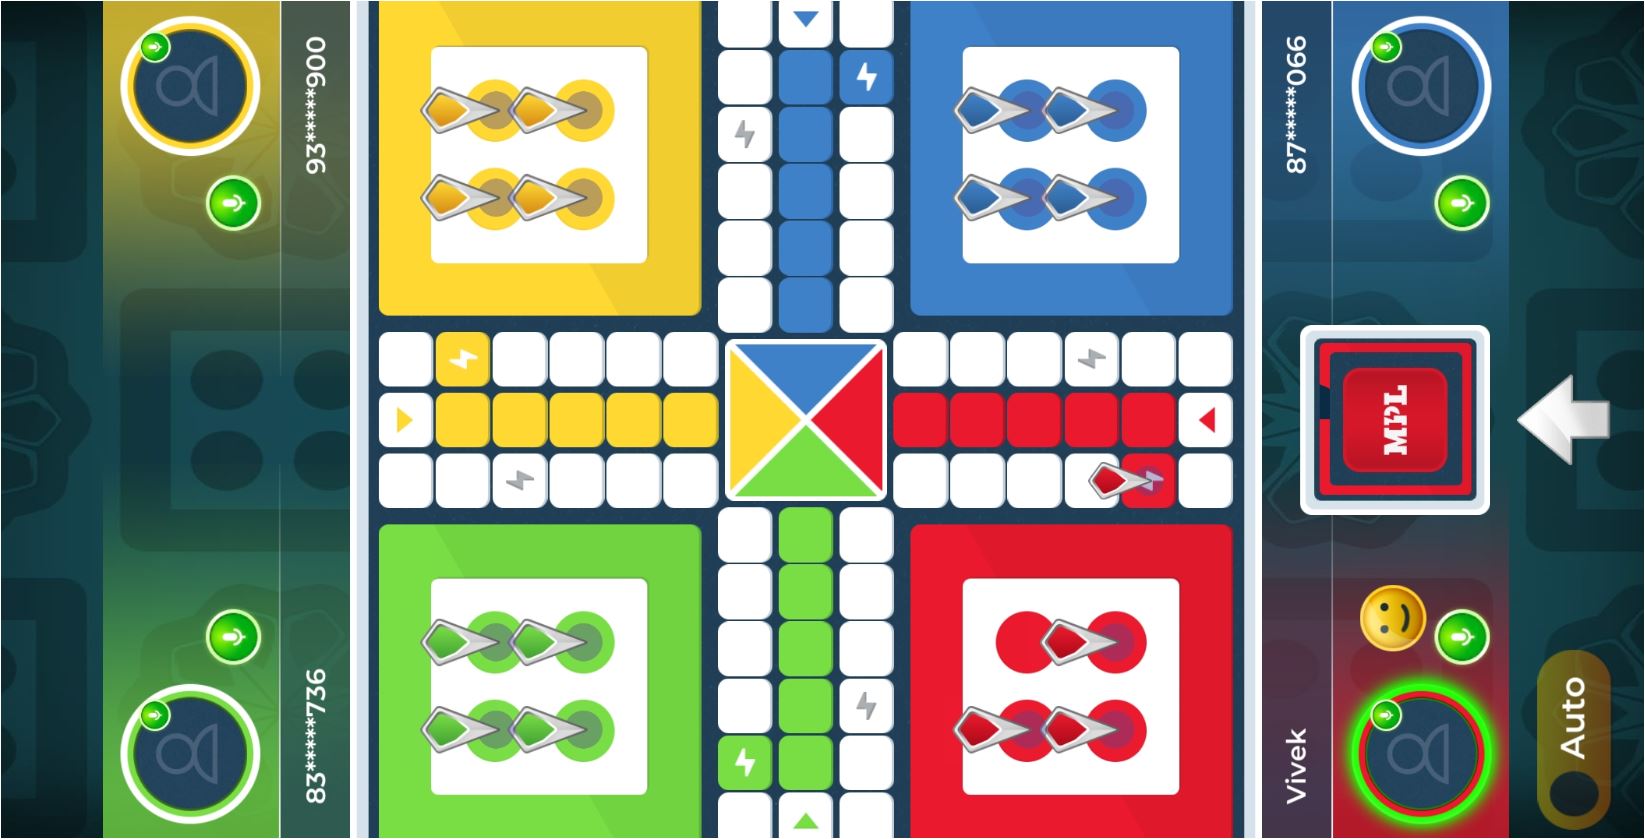 Ludo Game - Play Ludo Board Wala Online Game